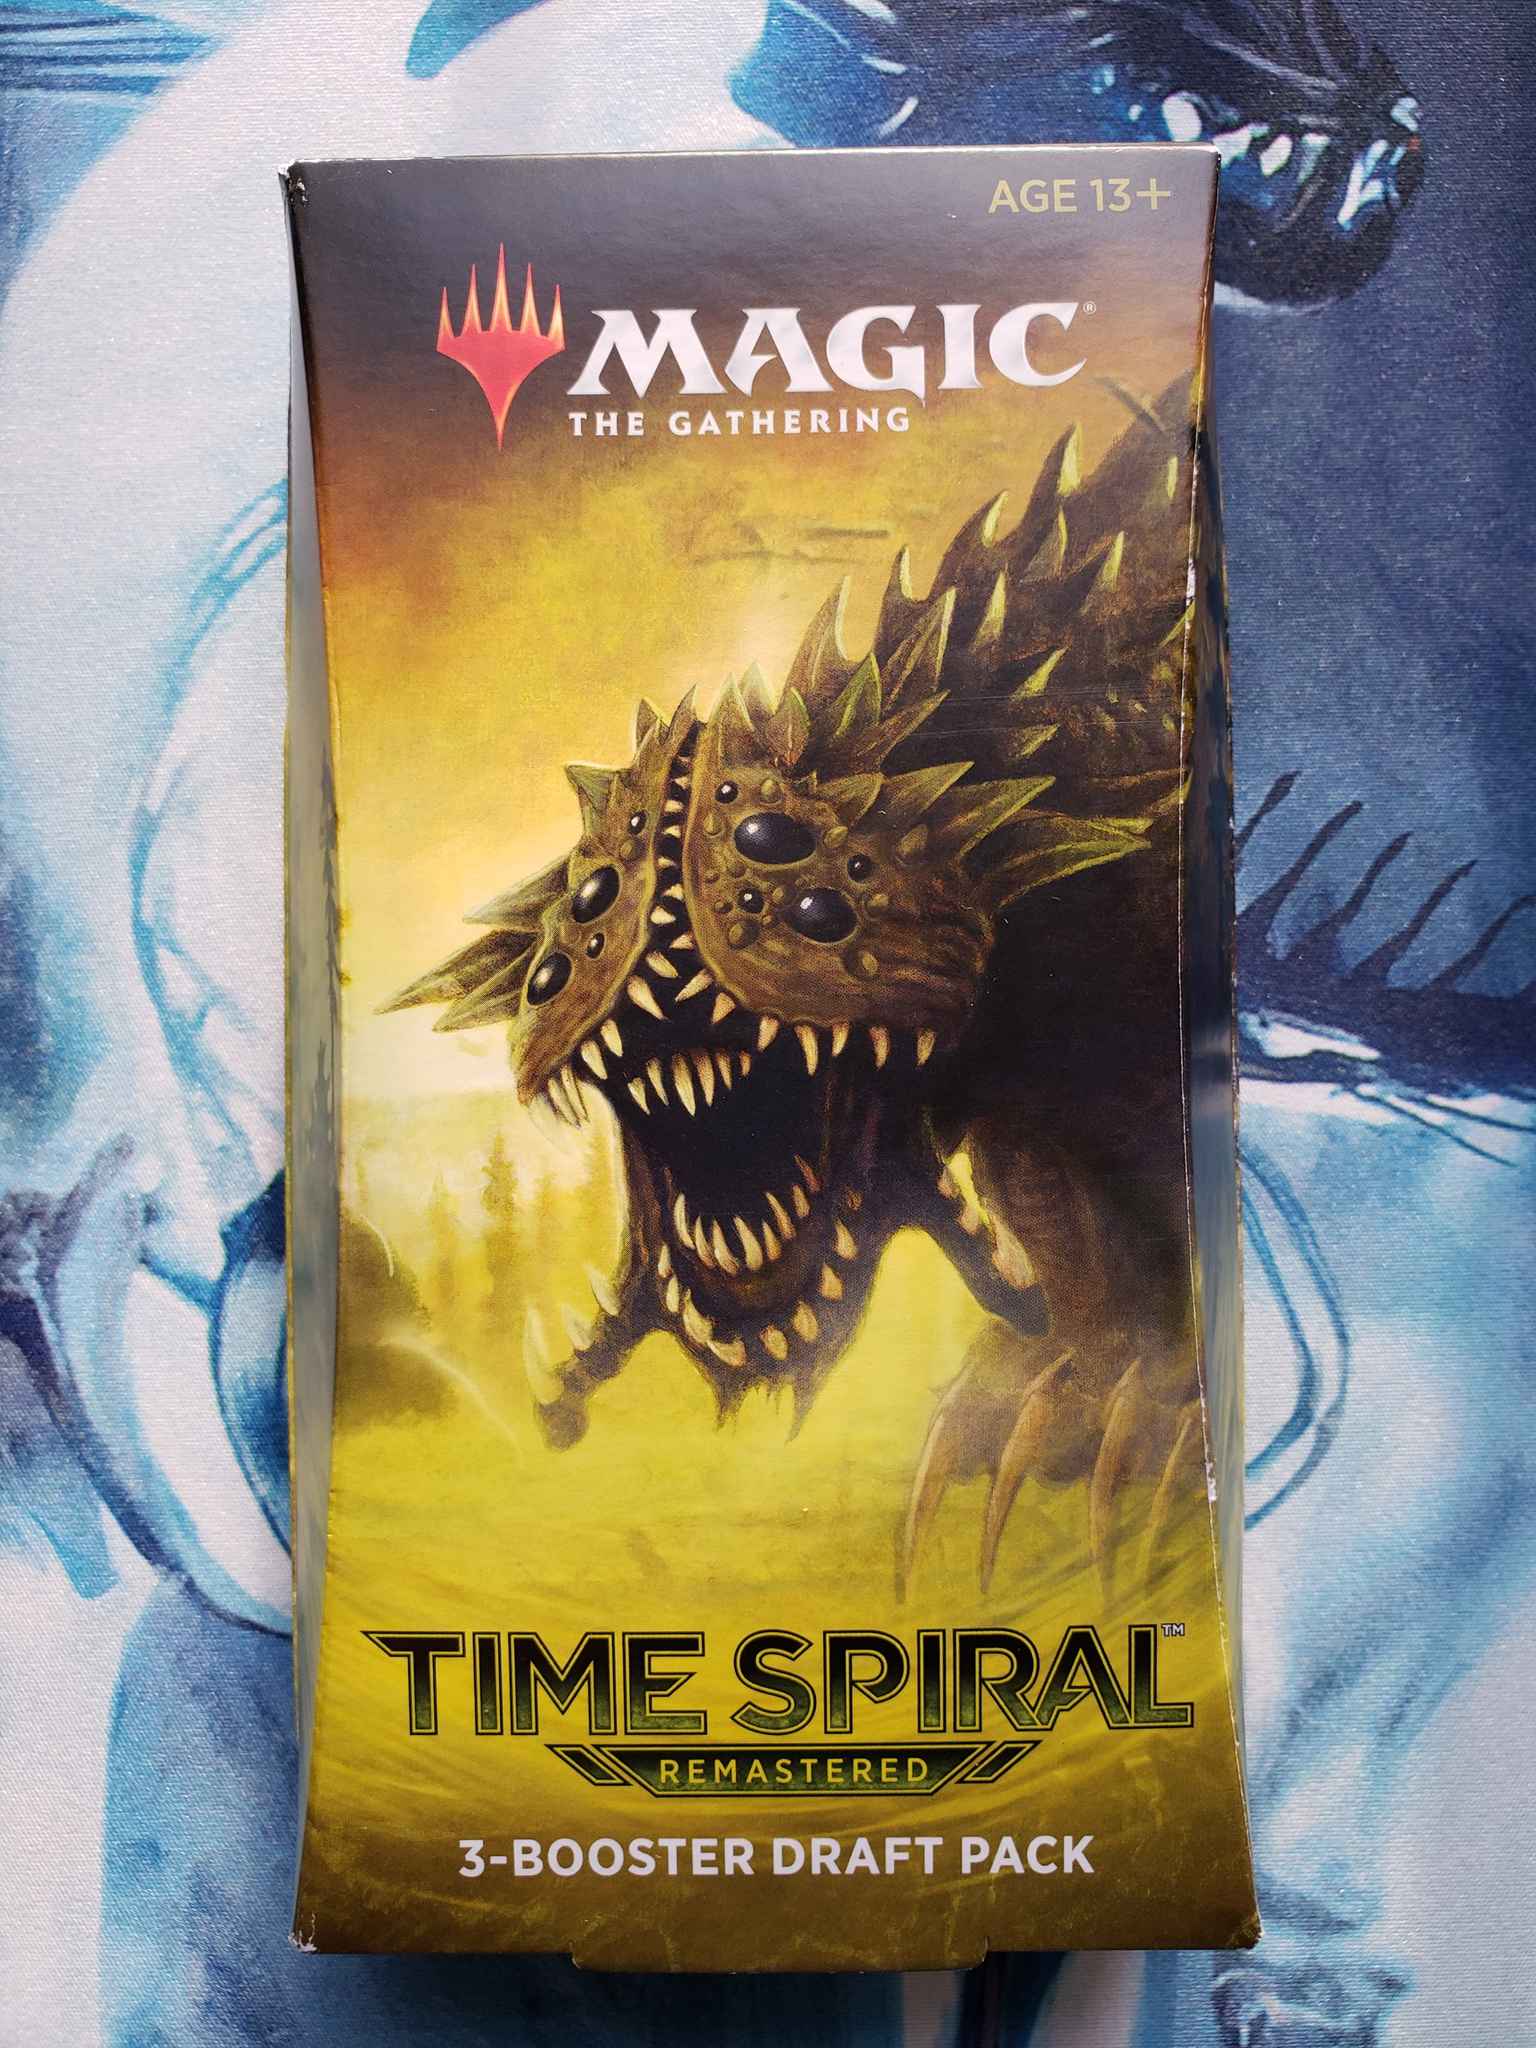 Time Spiral The Gathering Magic Remastered 3-Booster Draft Pack 